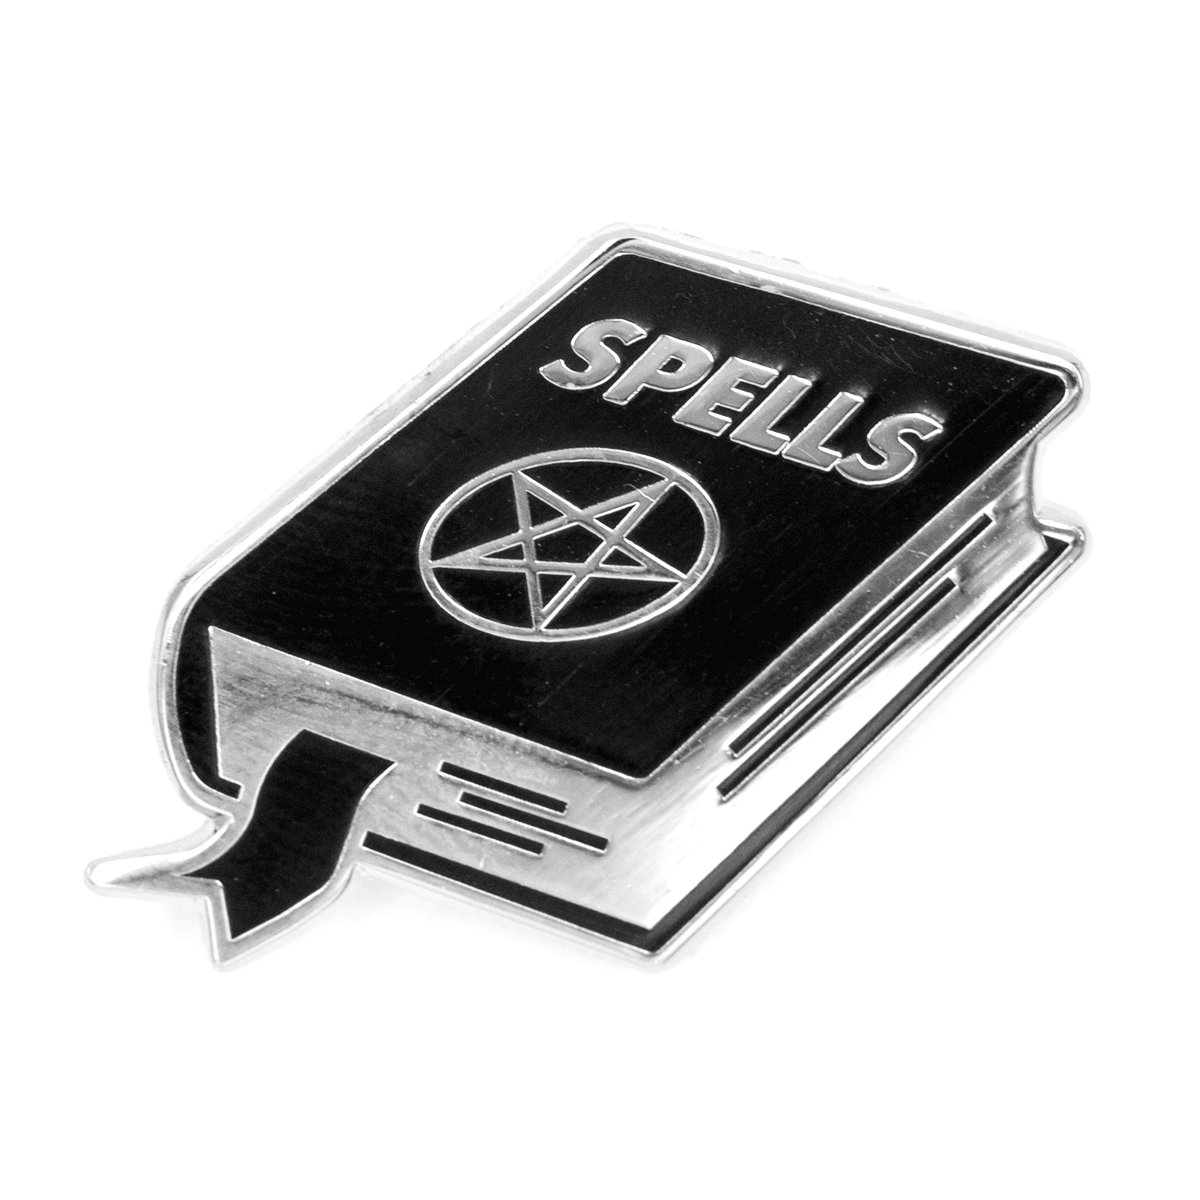 These Are Things - Spell Book Enamel Pin